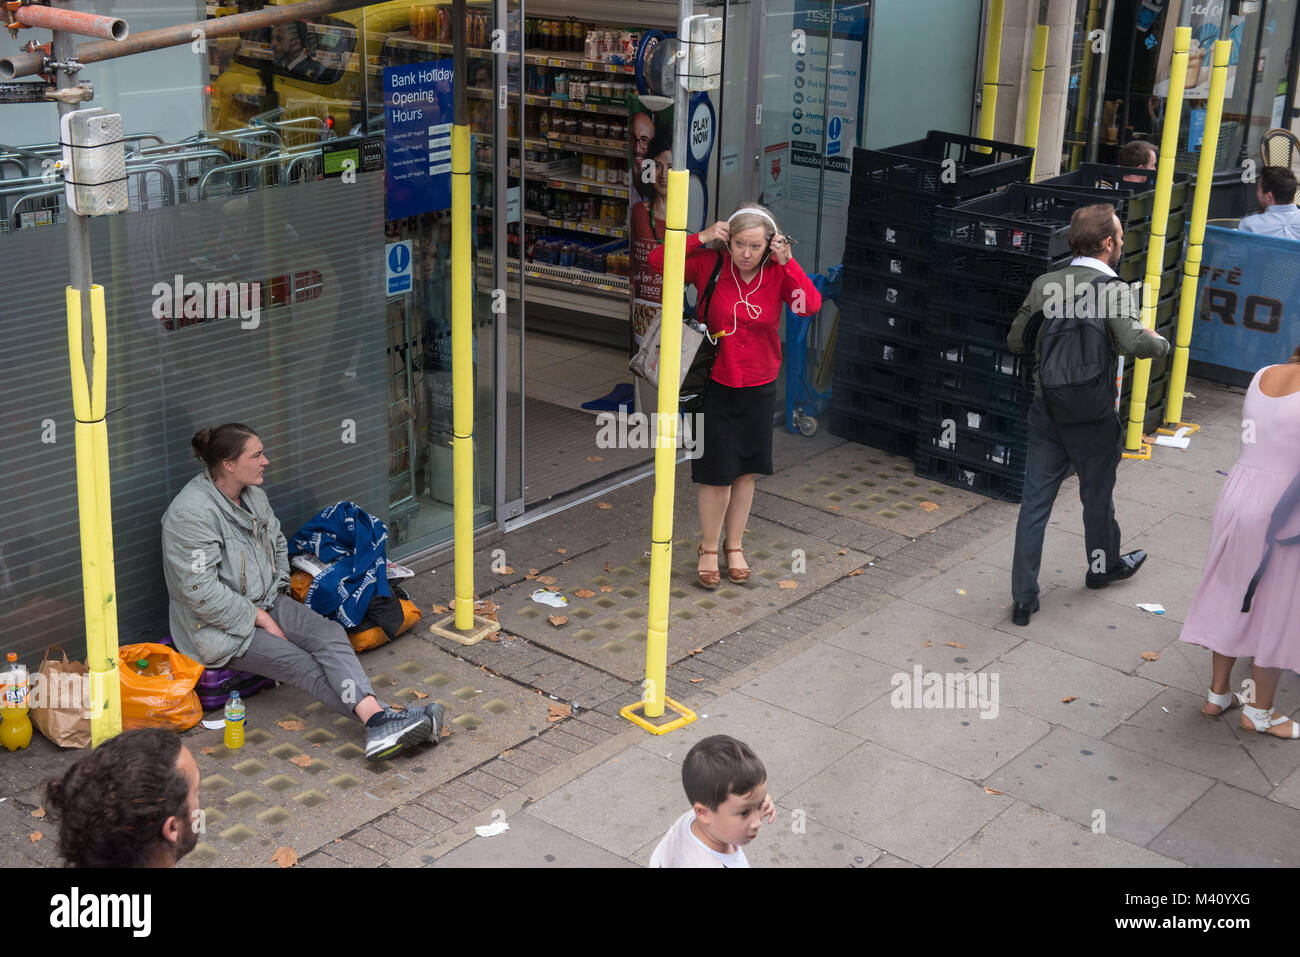 London, United Kingdom. Poverty. Scene from the bus. Stock Photo